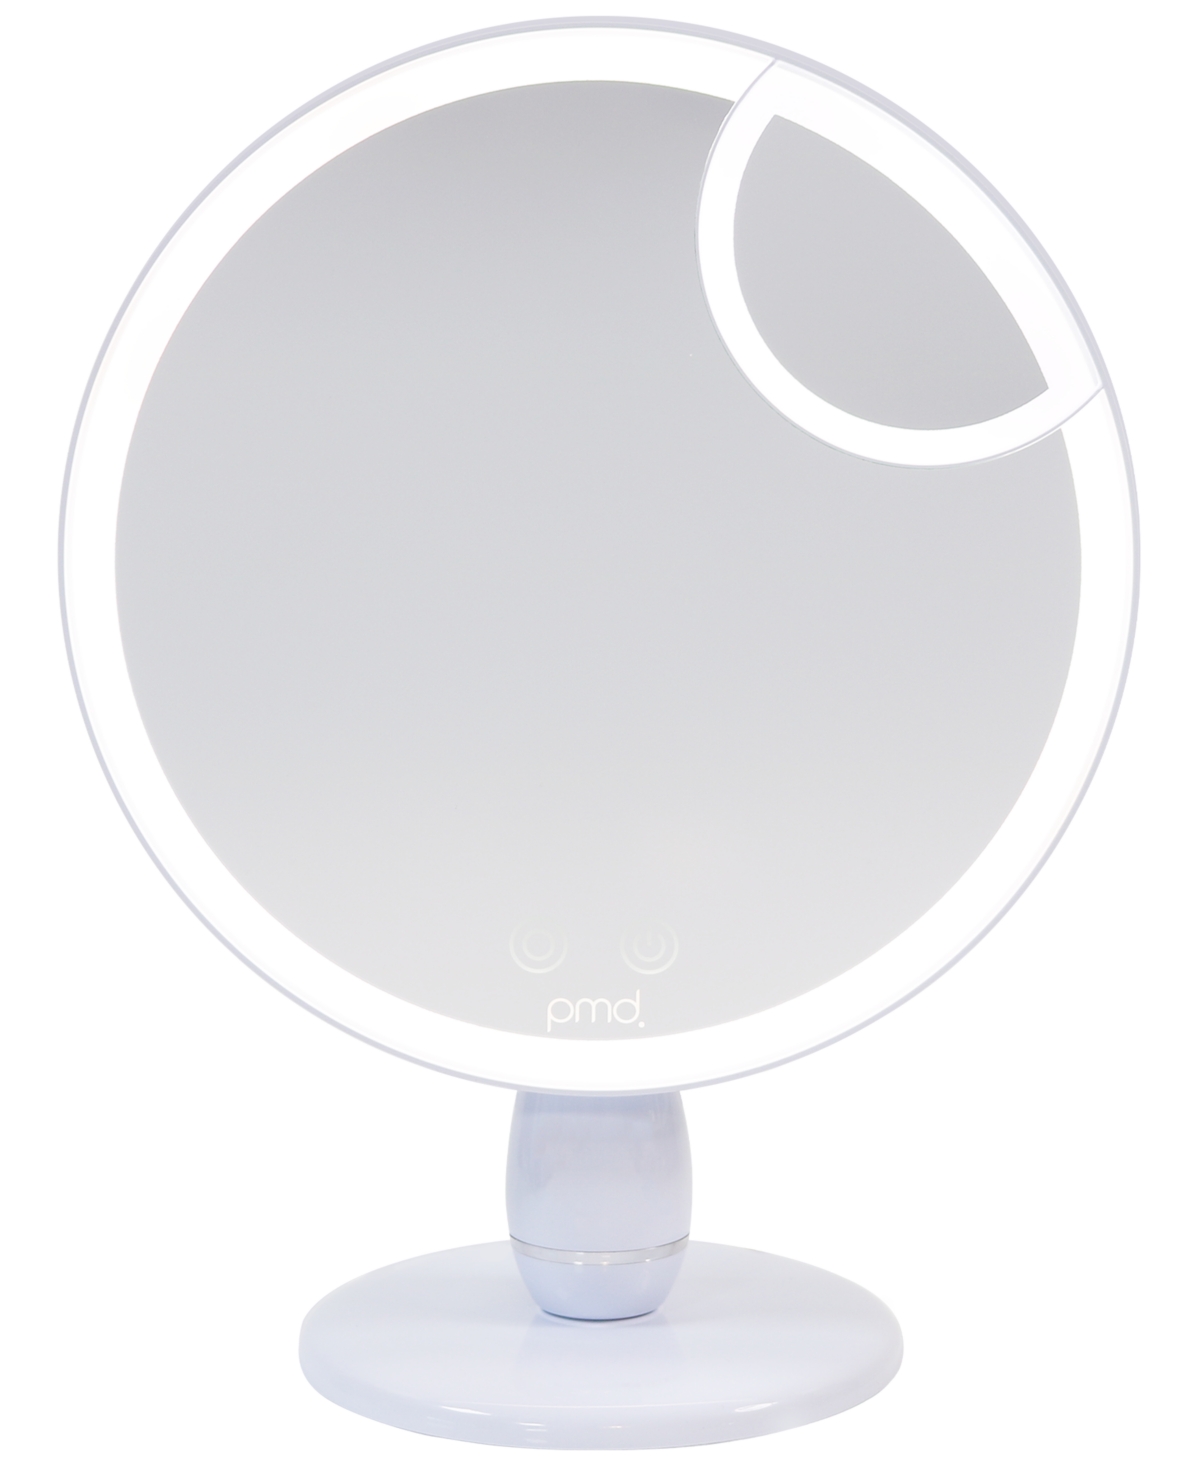 Pmd Reflect Pro In White